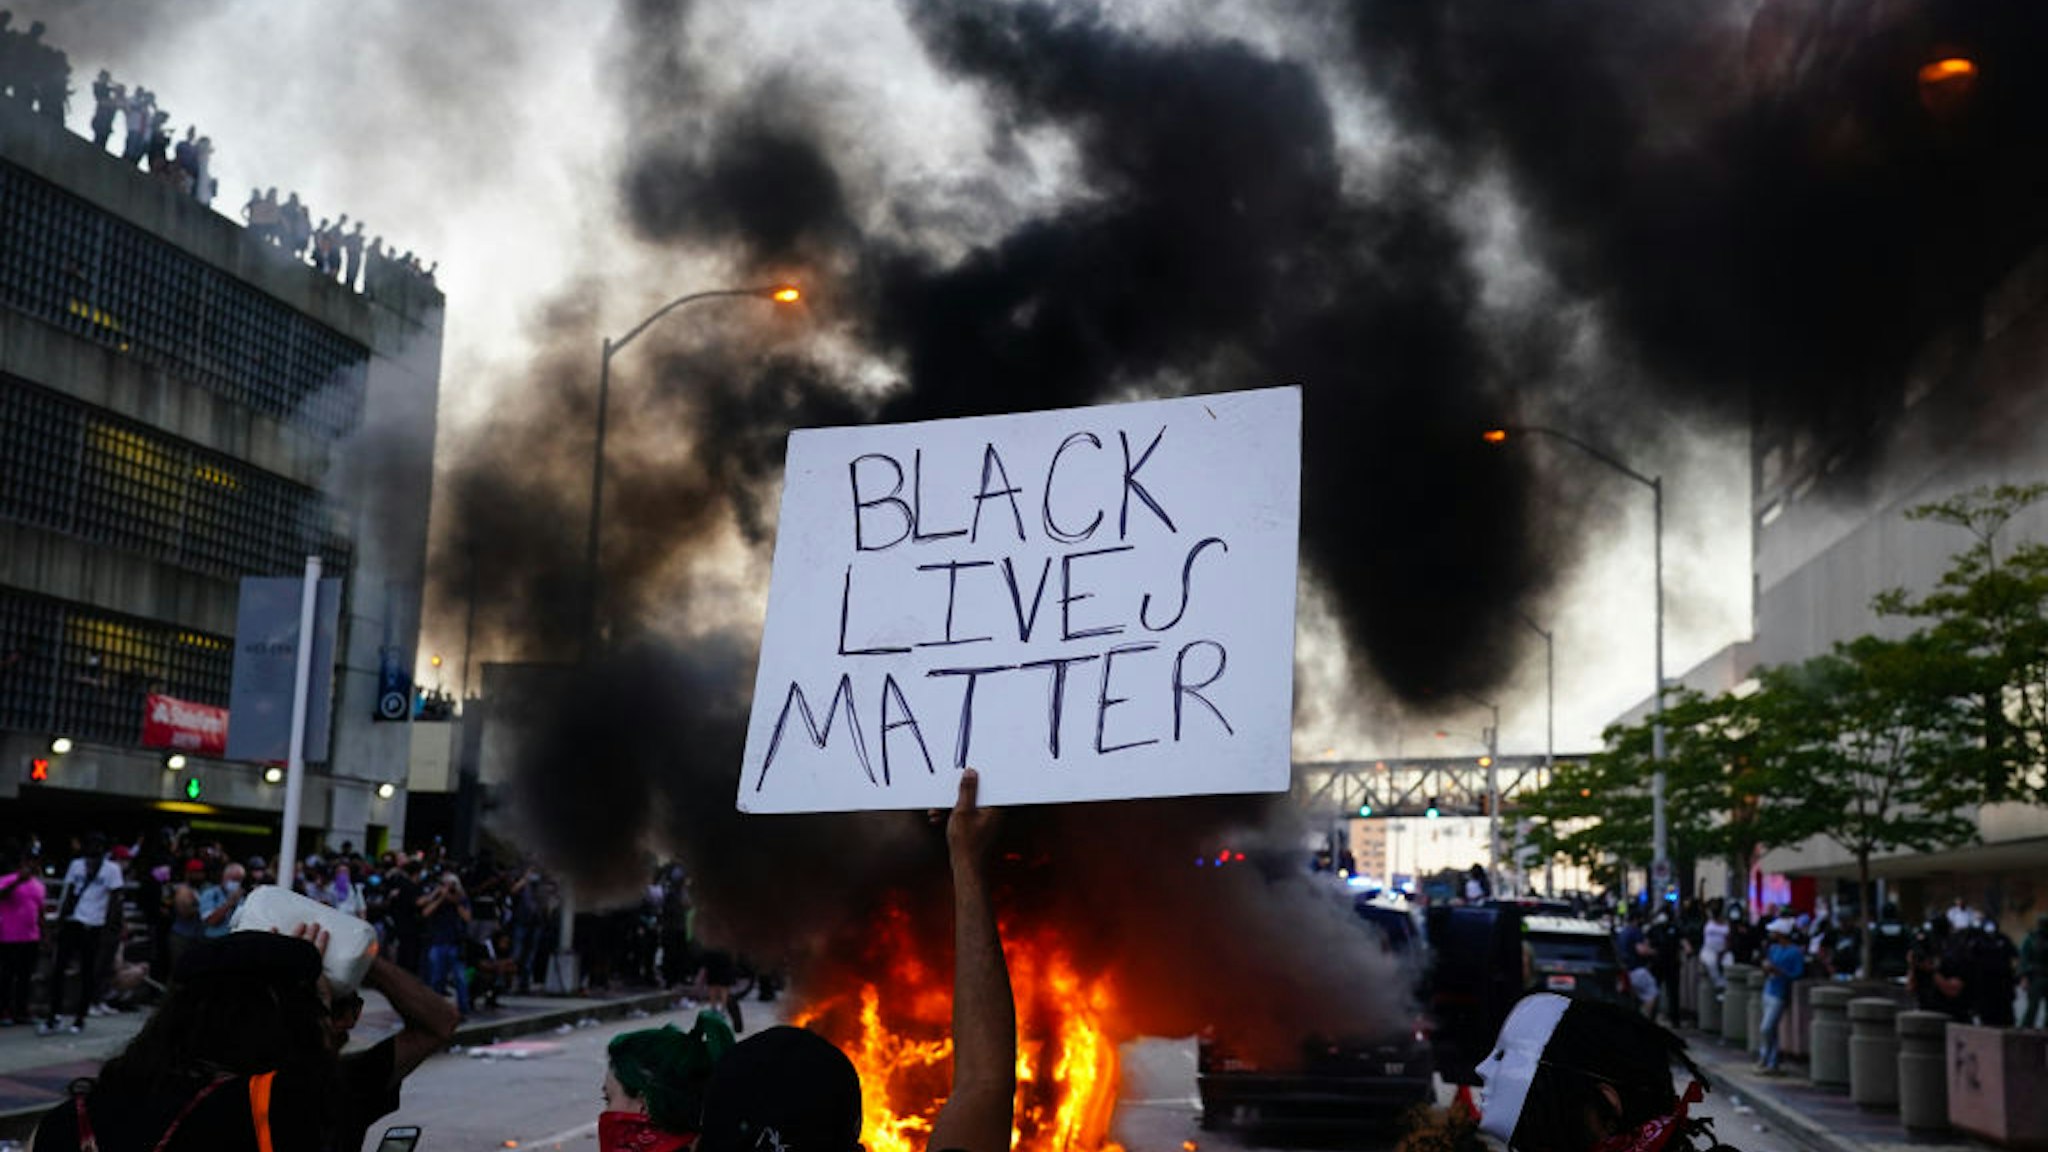 ATLANTA, GA - MAY 29: A man holds a Black Lives Matter sign as a police car burns during a protest on May 29, 2020 in Atlanta, Georgia. Demonstrations are being held across the US after George Floyd died in police custody on May 25th in Minneapolis, Minnesota.